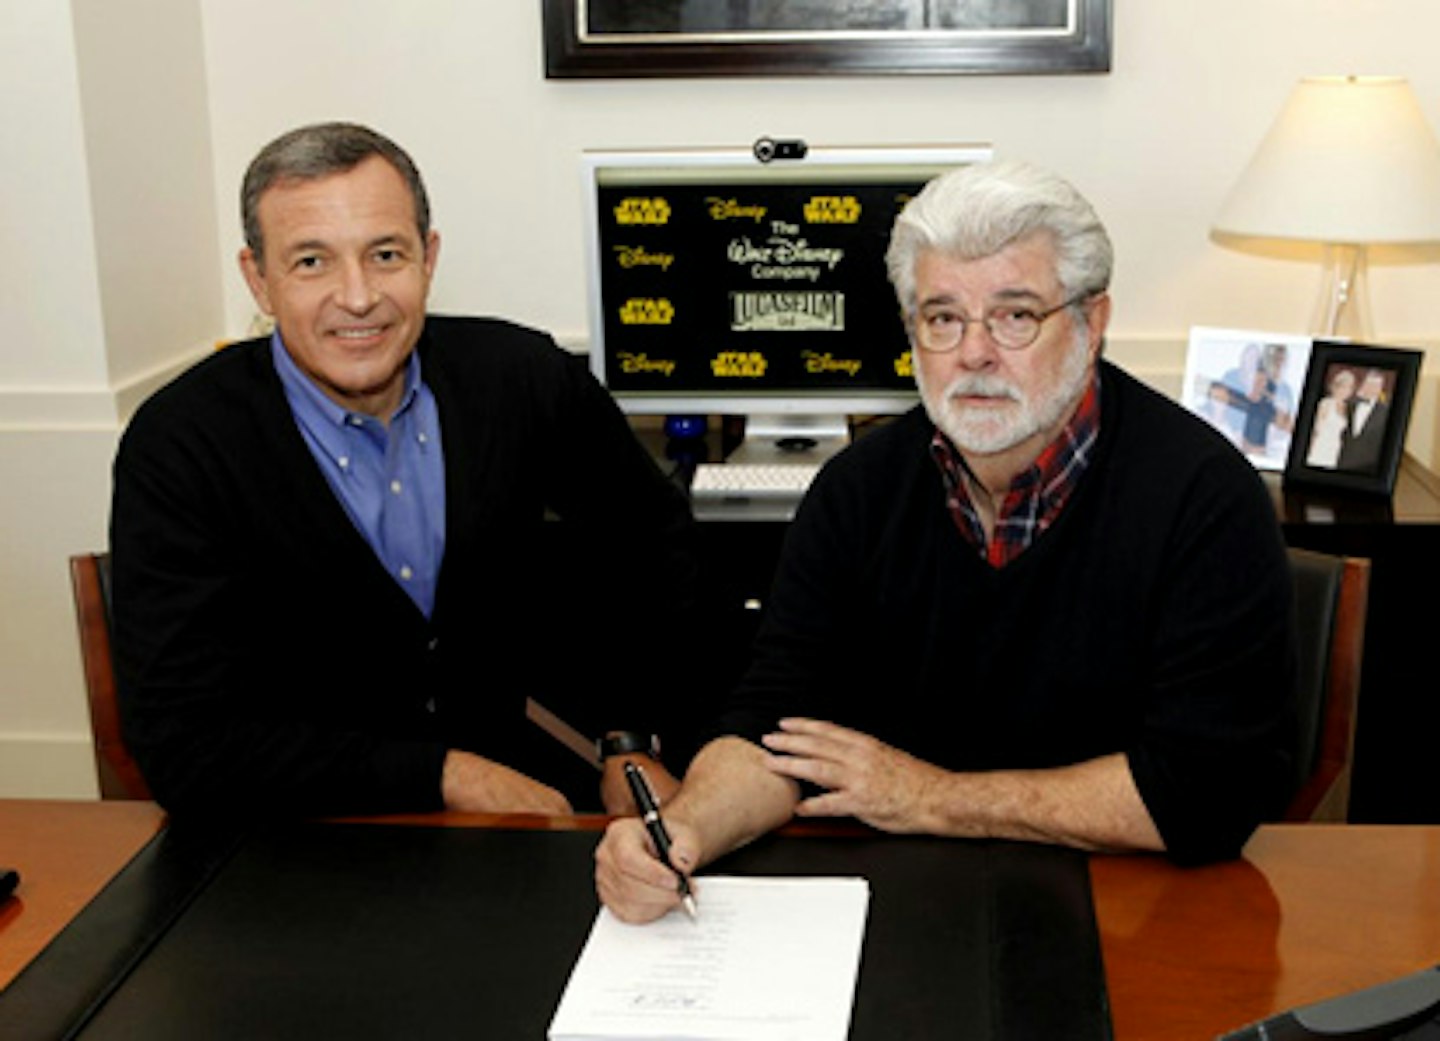 Robert A. Iger, chairman and CEO, The Walt Disney Company, and George Lucas, chairman and founder, Lucasfilm sign the agreement for The Walt Disney Company to acquire Lucasfilm Ltd.